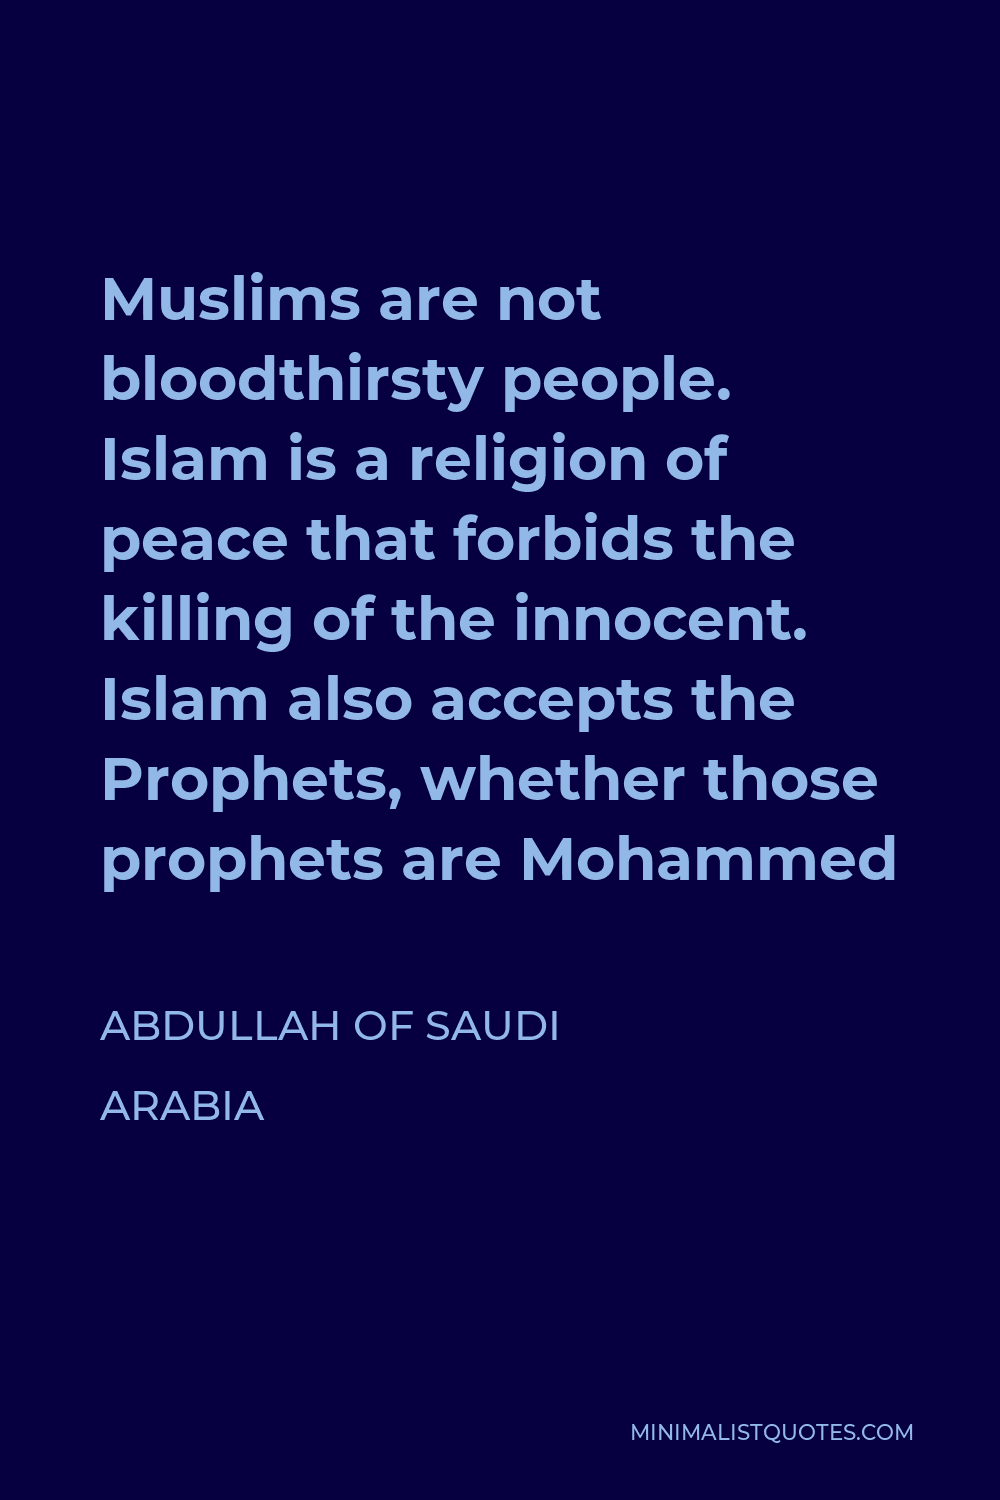 Abdullah of Saudi Arabia Quote - Muslims are not bloodthirsty people. Islam is a religion of peace that forbids the killing of the innocent. Islam also accepts the Prophets, whether those prophets are Mohammed